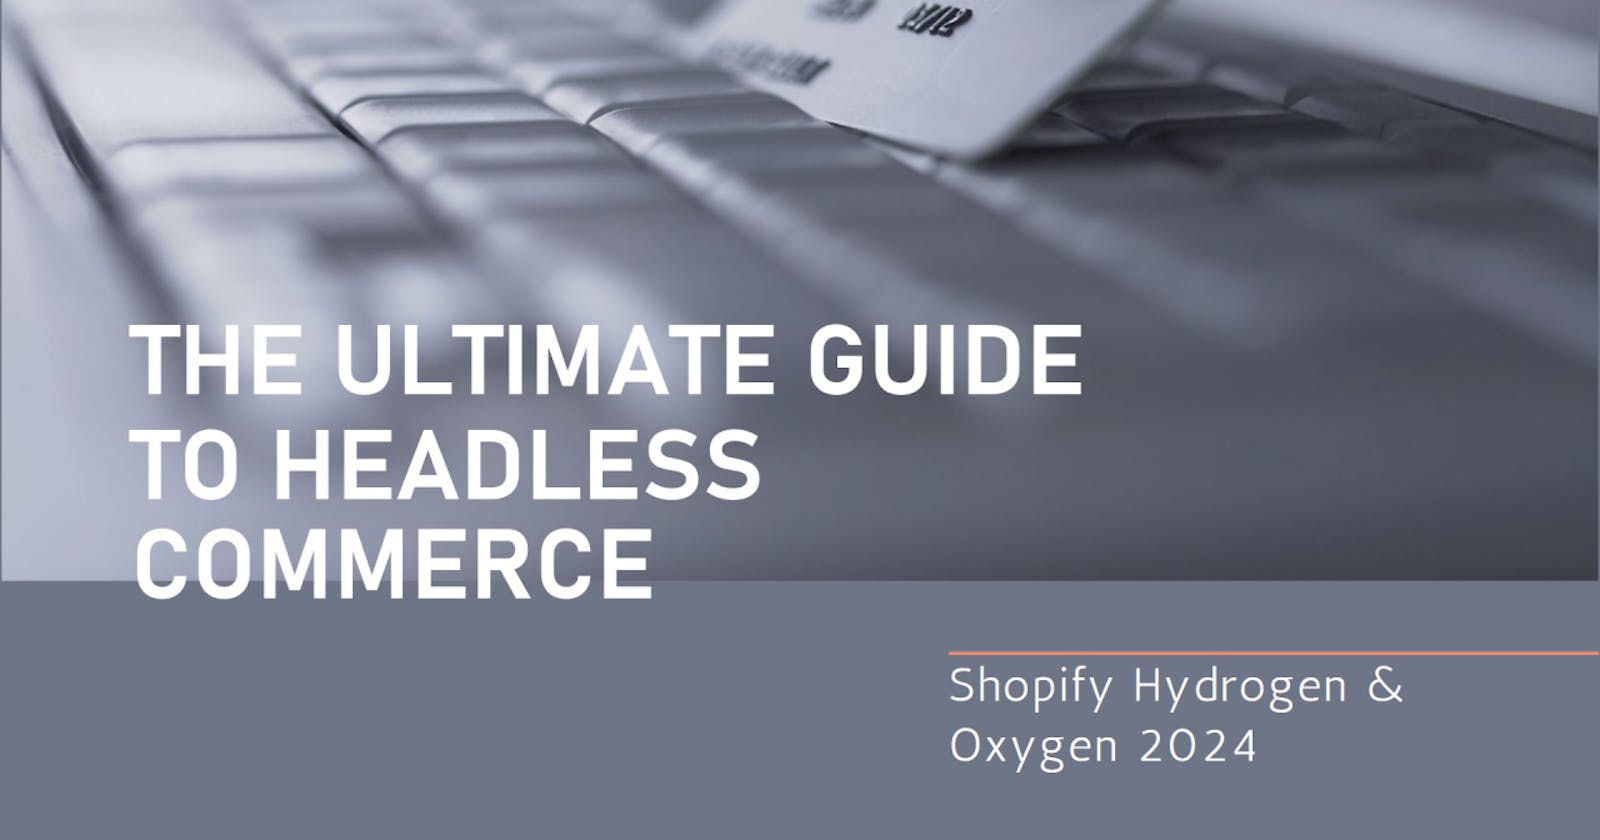 Shopify Hydrogen & Oxygen: The 2024 Guide to Headless Commerce